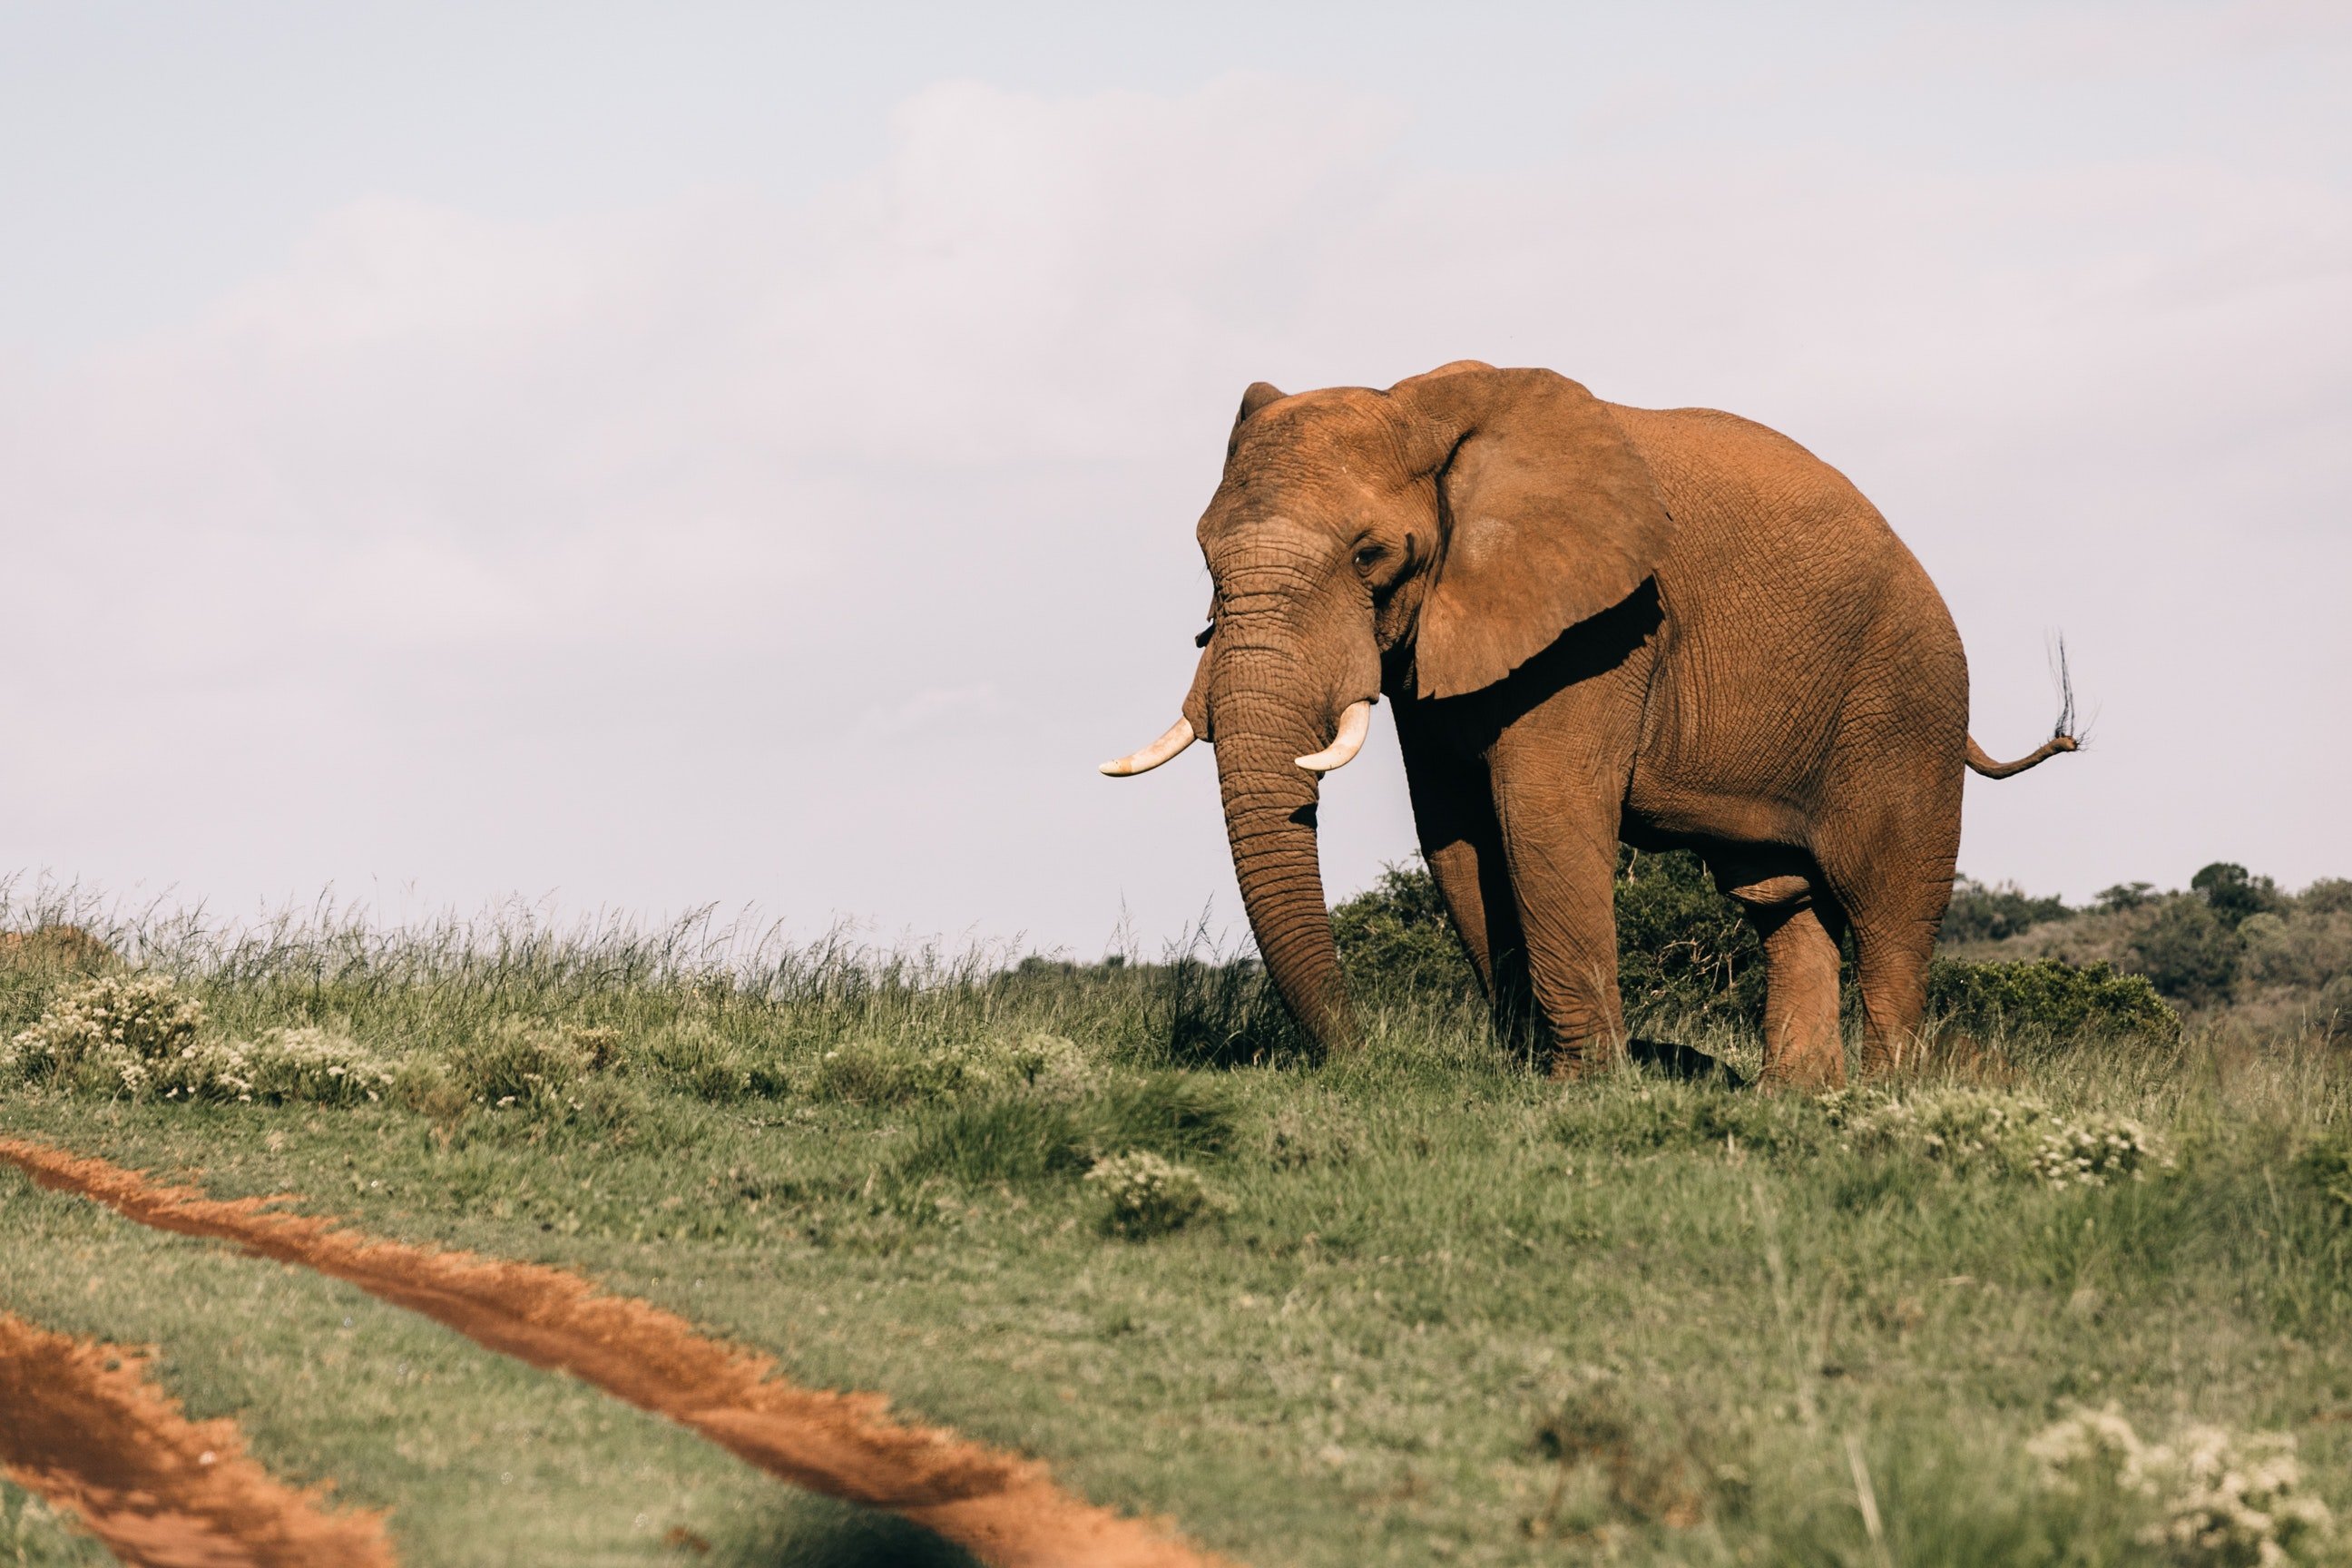 Pictured - A photo of an elephant on grassy fields | Source: Pexels 